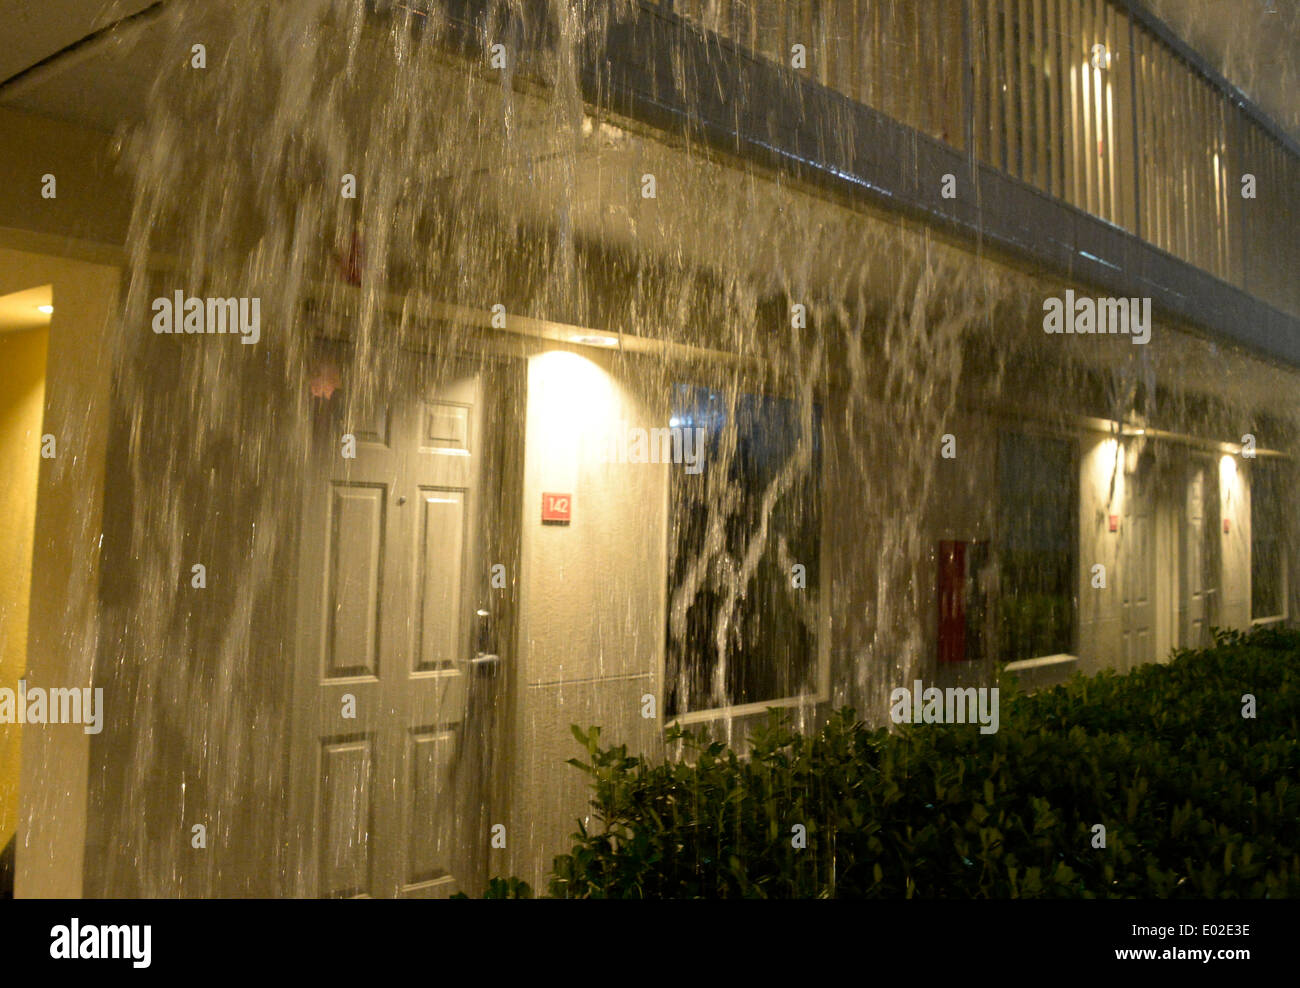 April 27, 2014. Tuscaloosa Alabama. USA-Heavy rain pours like a water fall from a TVS( Tornadic vortex signature) tornado storm in Tuscaloosa Alabama Monday night April 28, 2014. Dozens of tornadoes flared up across the south inflicting widespread damage across Alabama and Mississippi that contributed to the deaths of more than a dozen individuals. Preliminary reports from the National Weather's Storm Prediction Center indicate 52 reports of tornadoes since 7 am CDT Monday.At least seven people were killed in Mississippi from the wave of tornadoes. Photo by Gene Blevins/LA DailyNews/ZumaPre Stock Photo